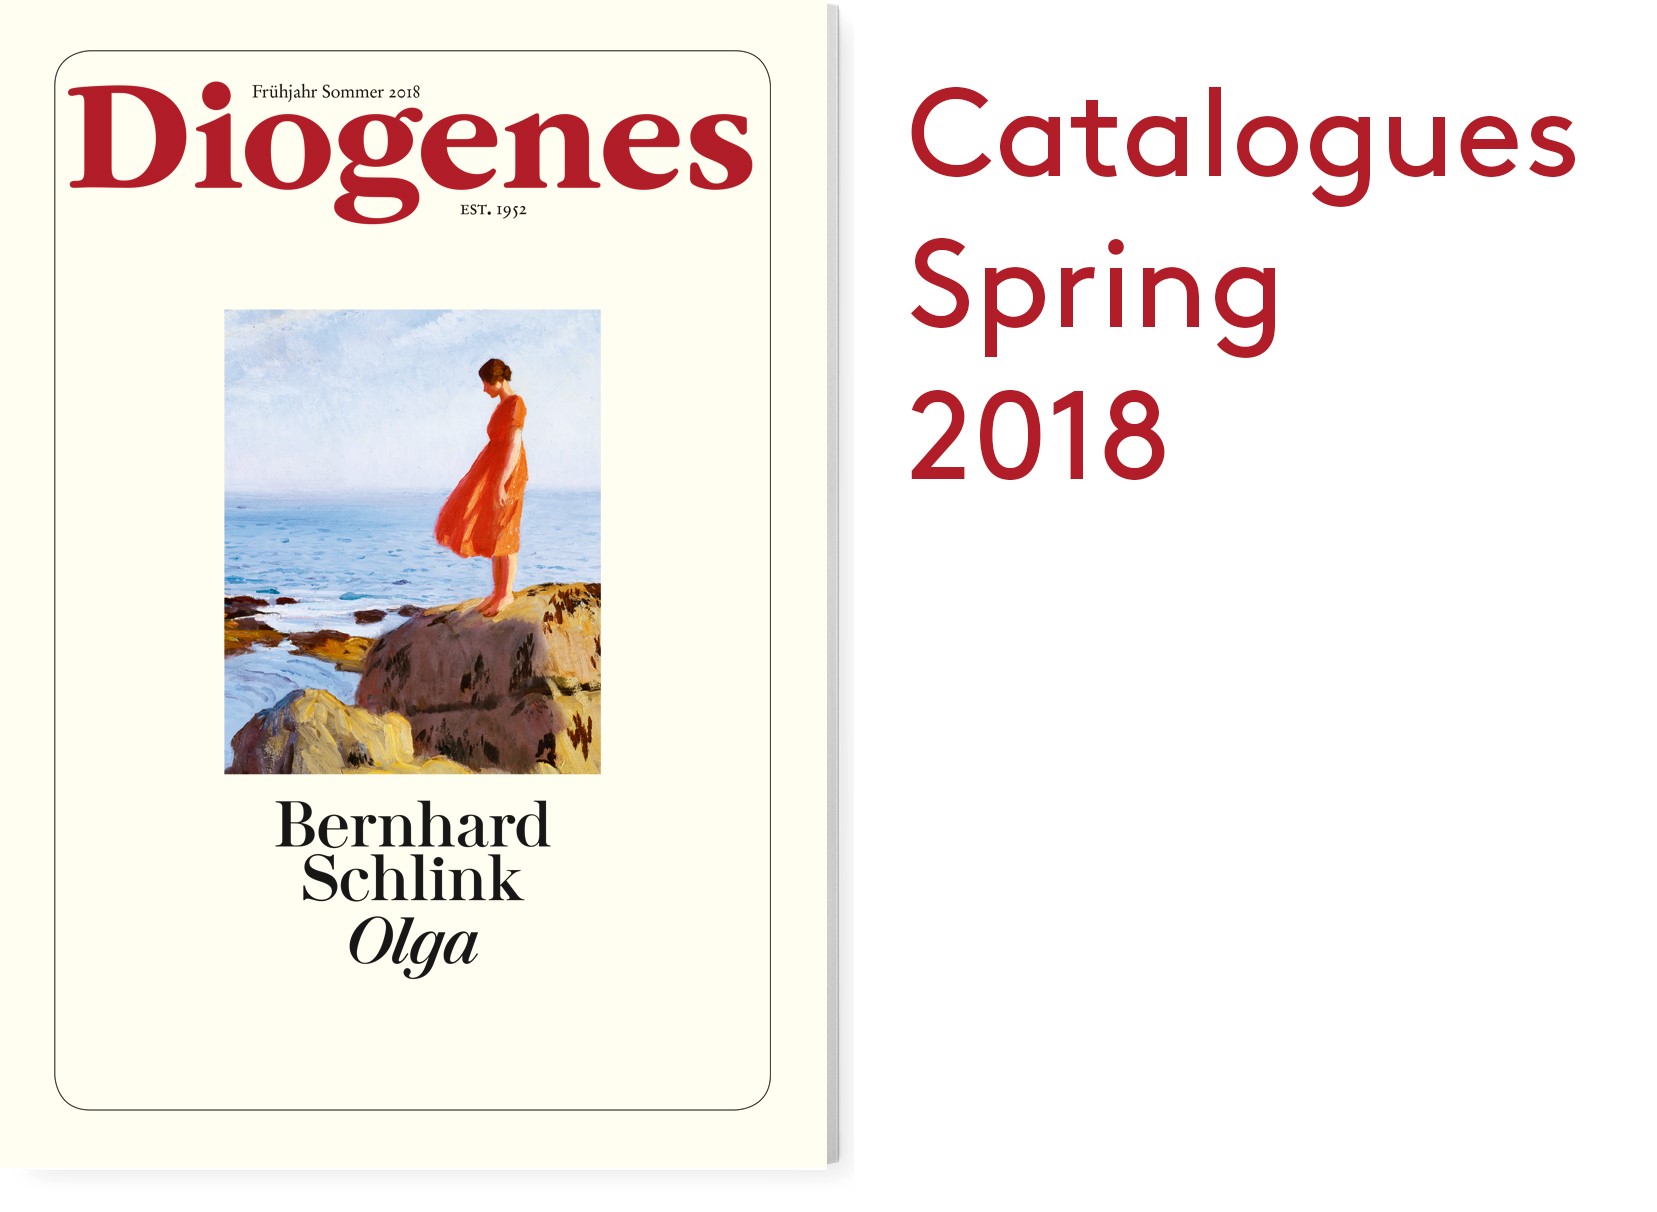 Diogenes Catalogues Spring 2018